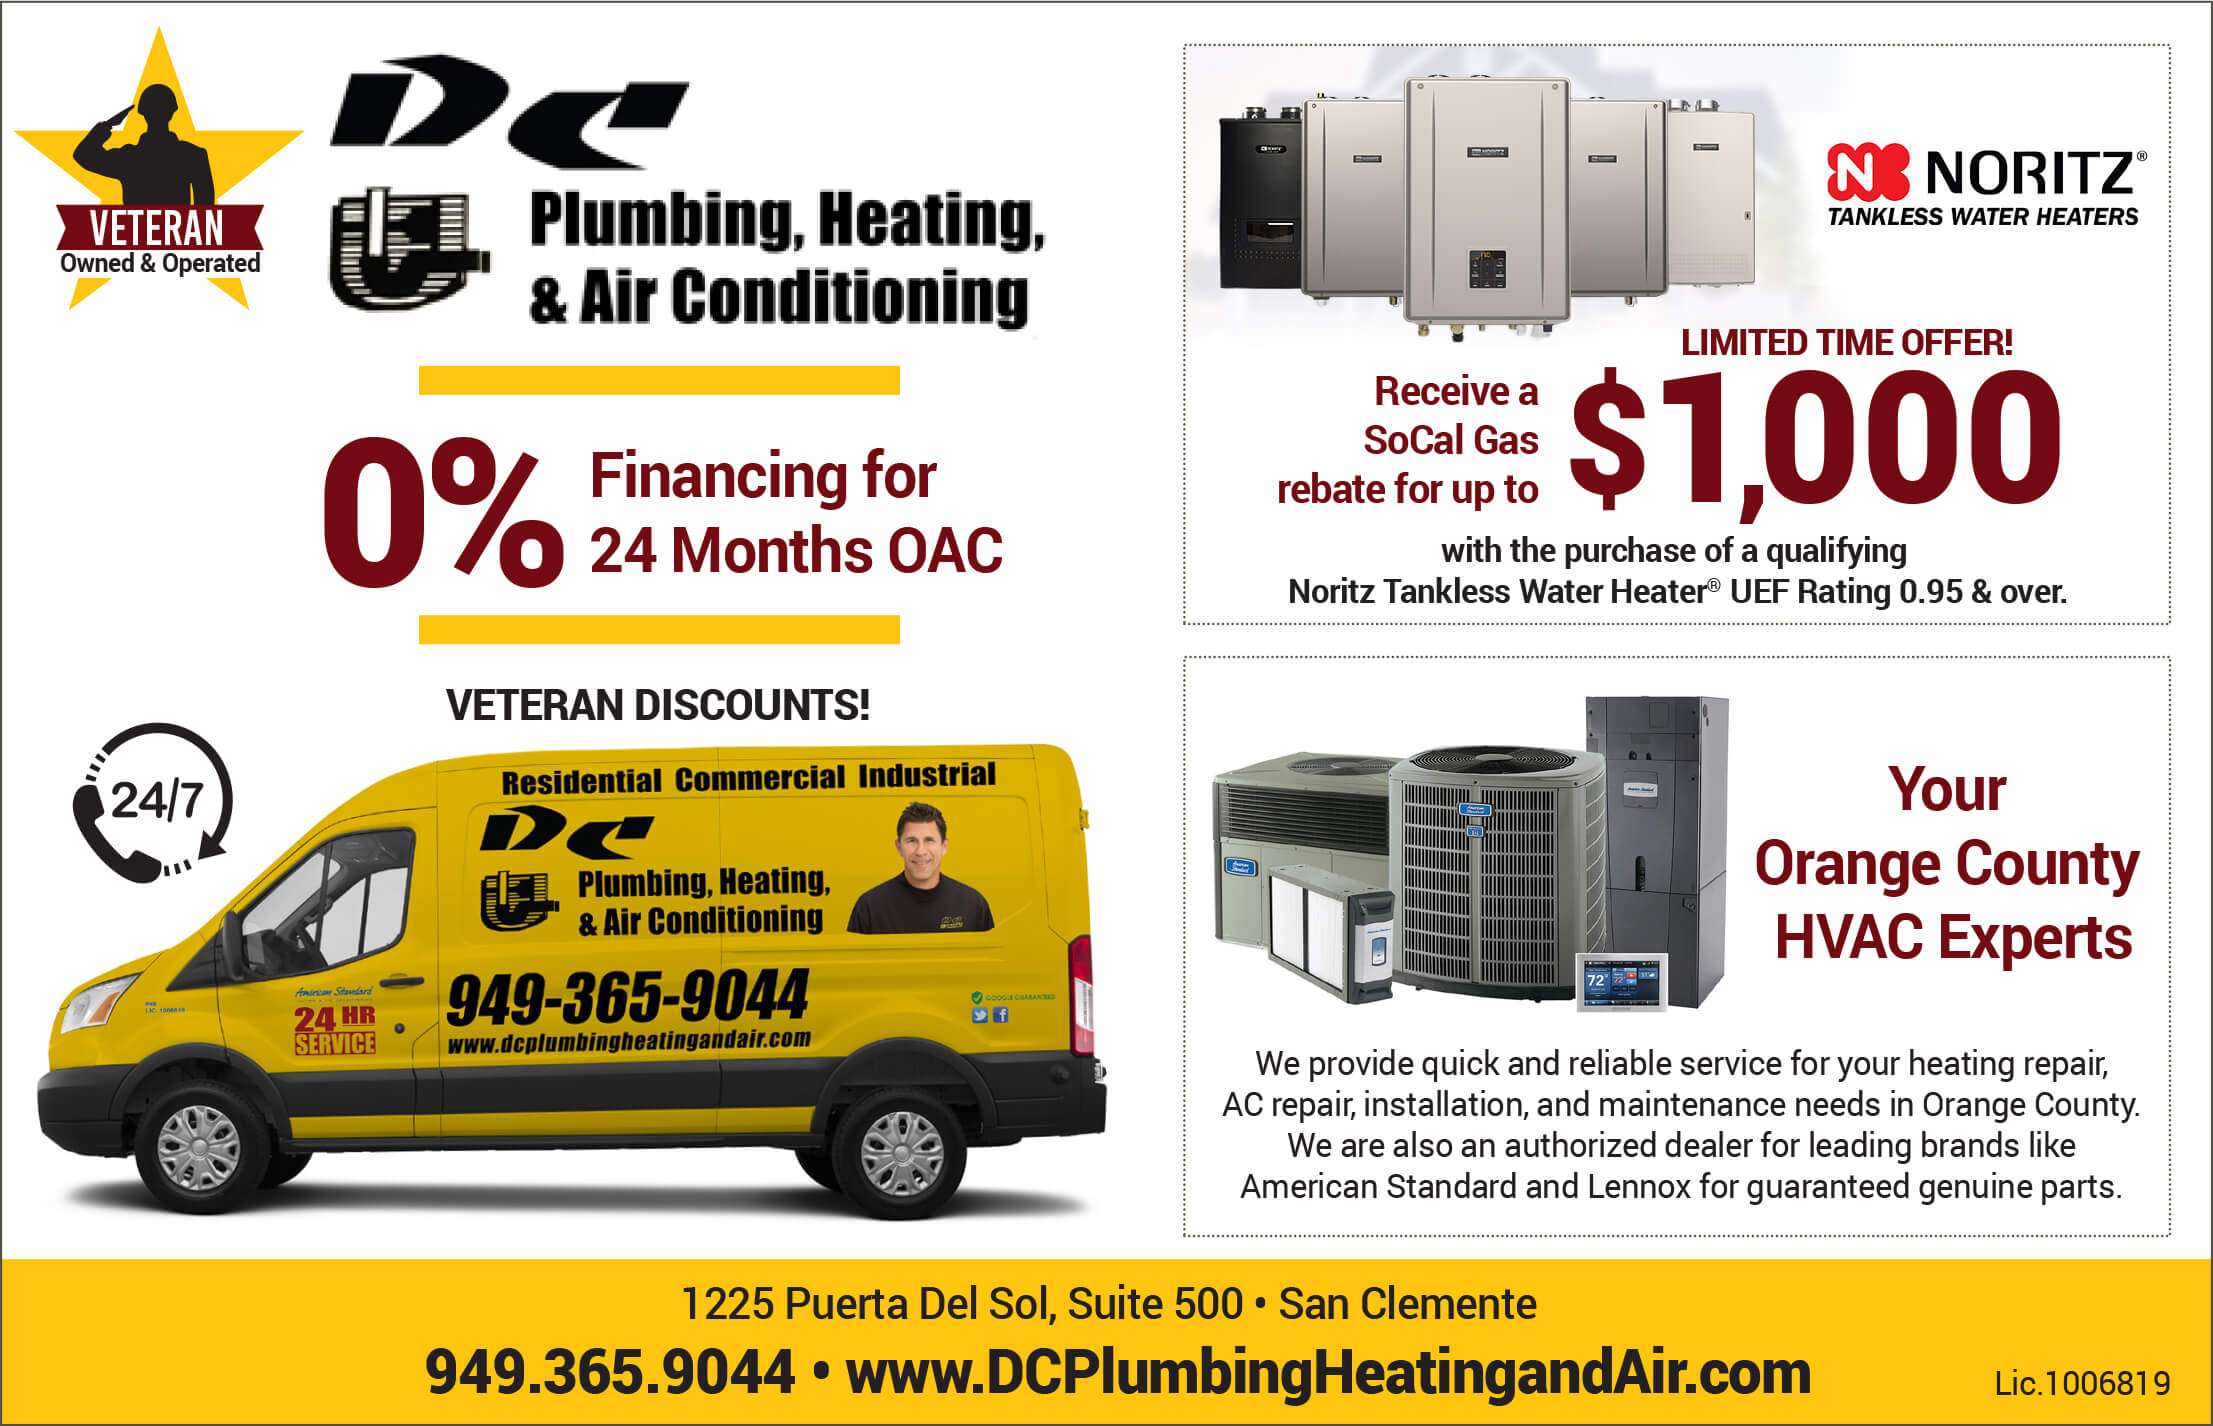 DC Plumbing, Heating, and Air Conditioning